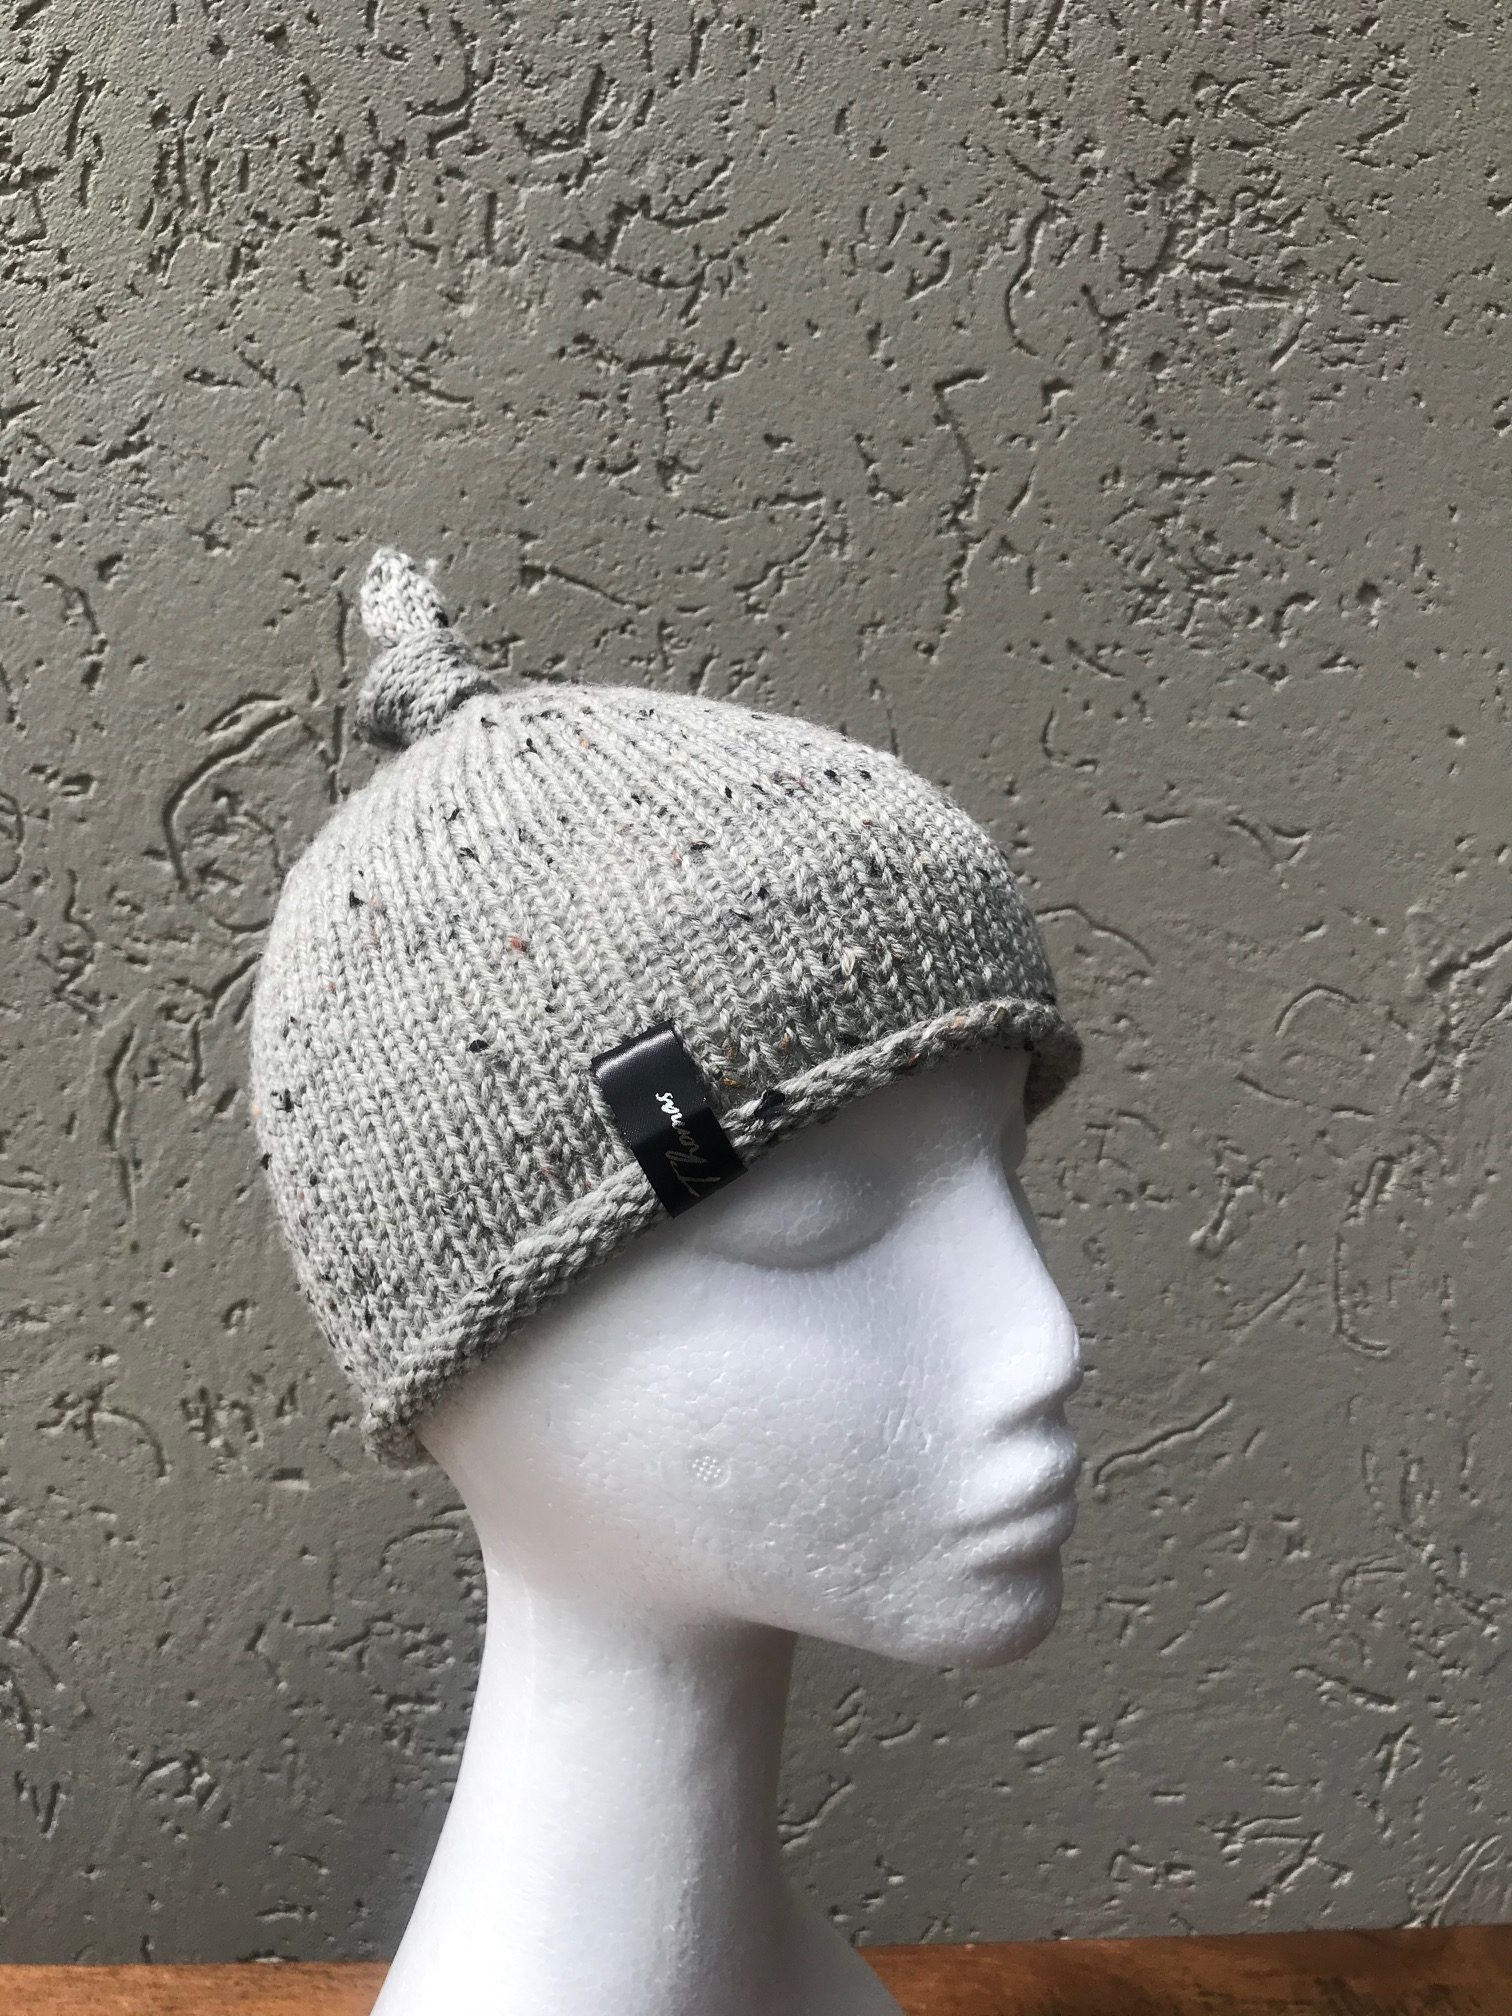 grey knitted baby hat